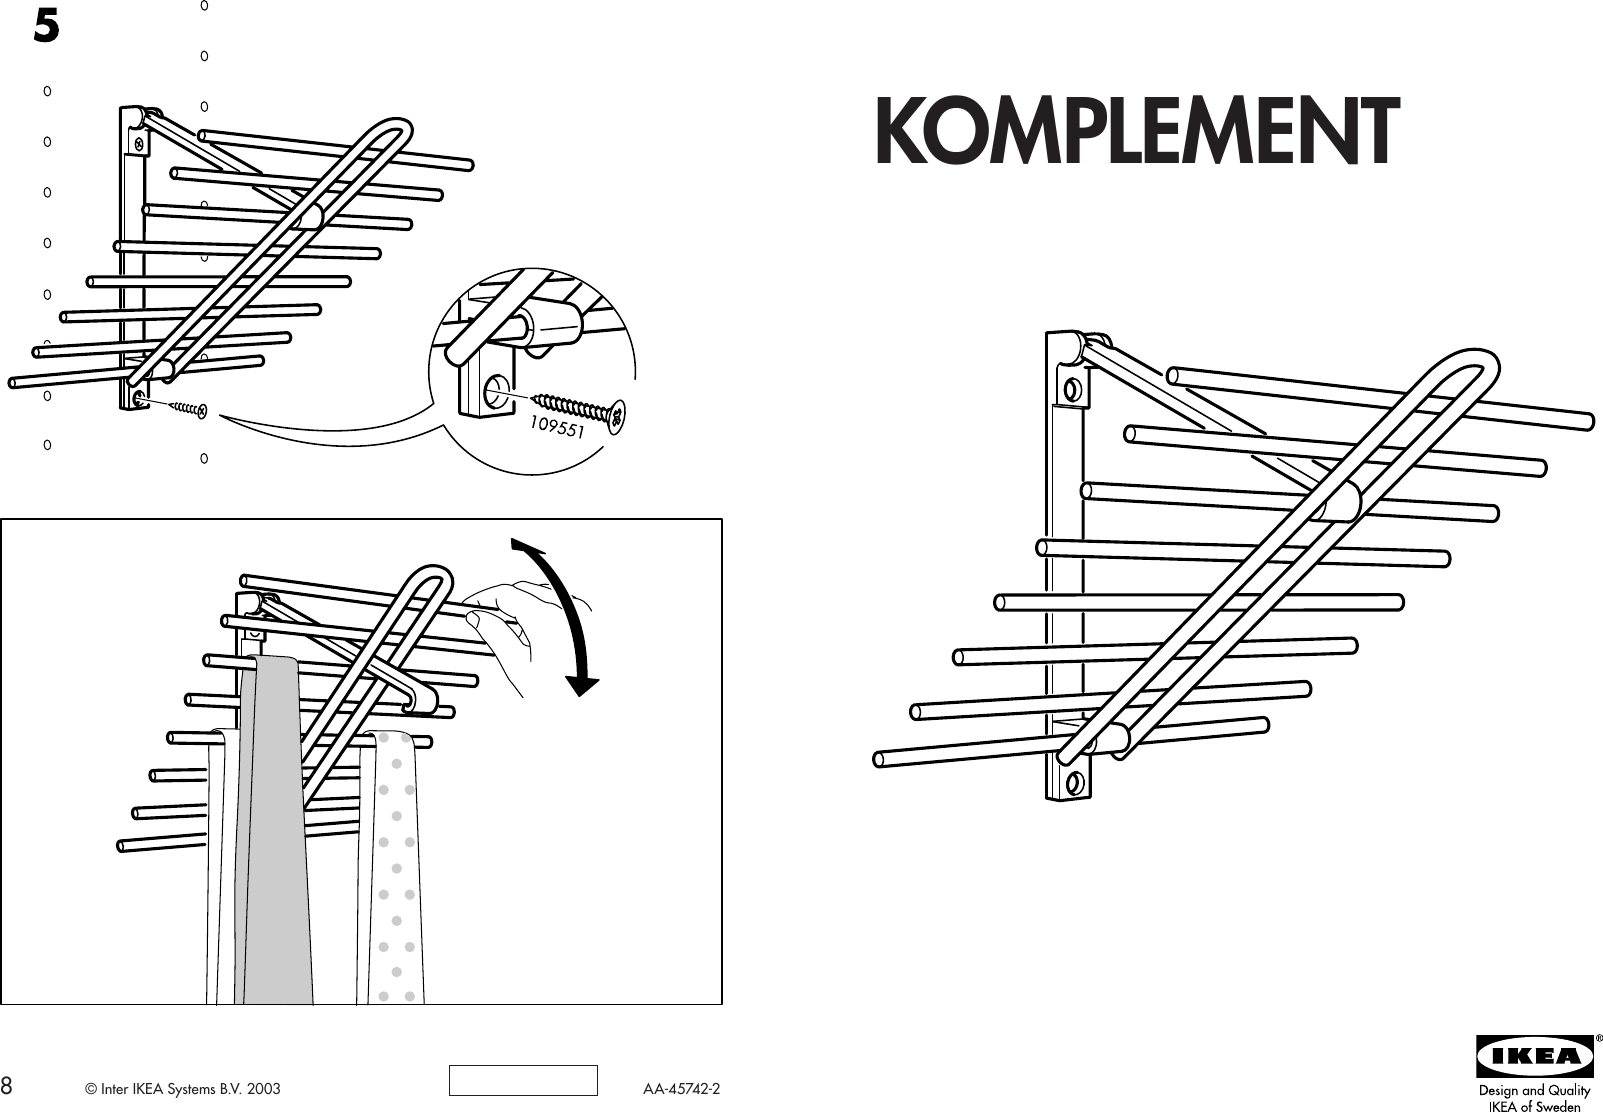 Page 1 of 4 - Ikea Ikea-Komplement-Tie-Rack-Assembly-Instruction-7  Ikea-komplement-tie-rack-assembly-instruction